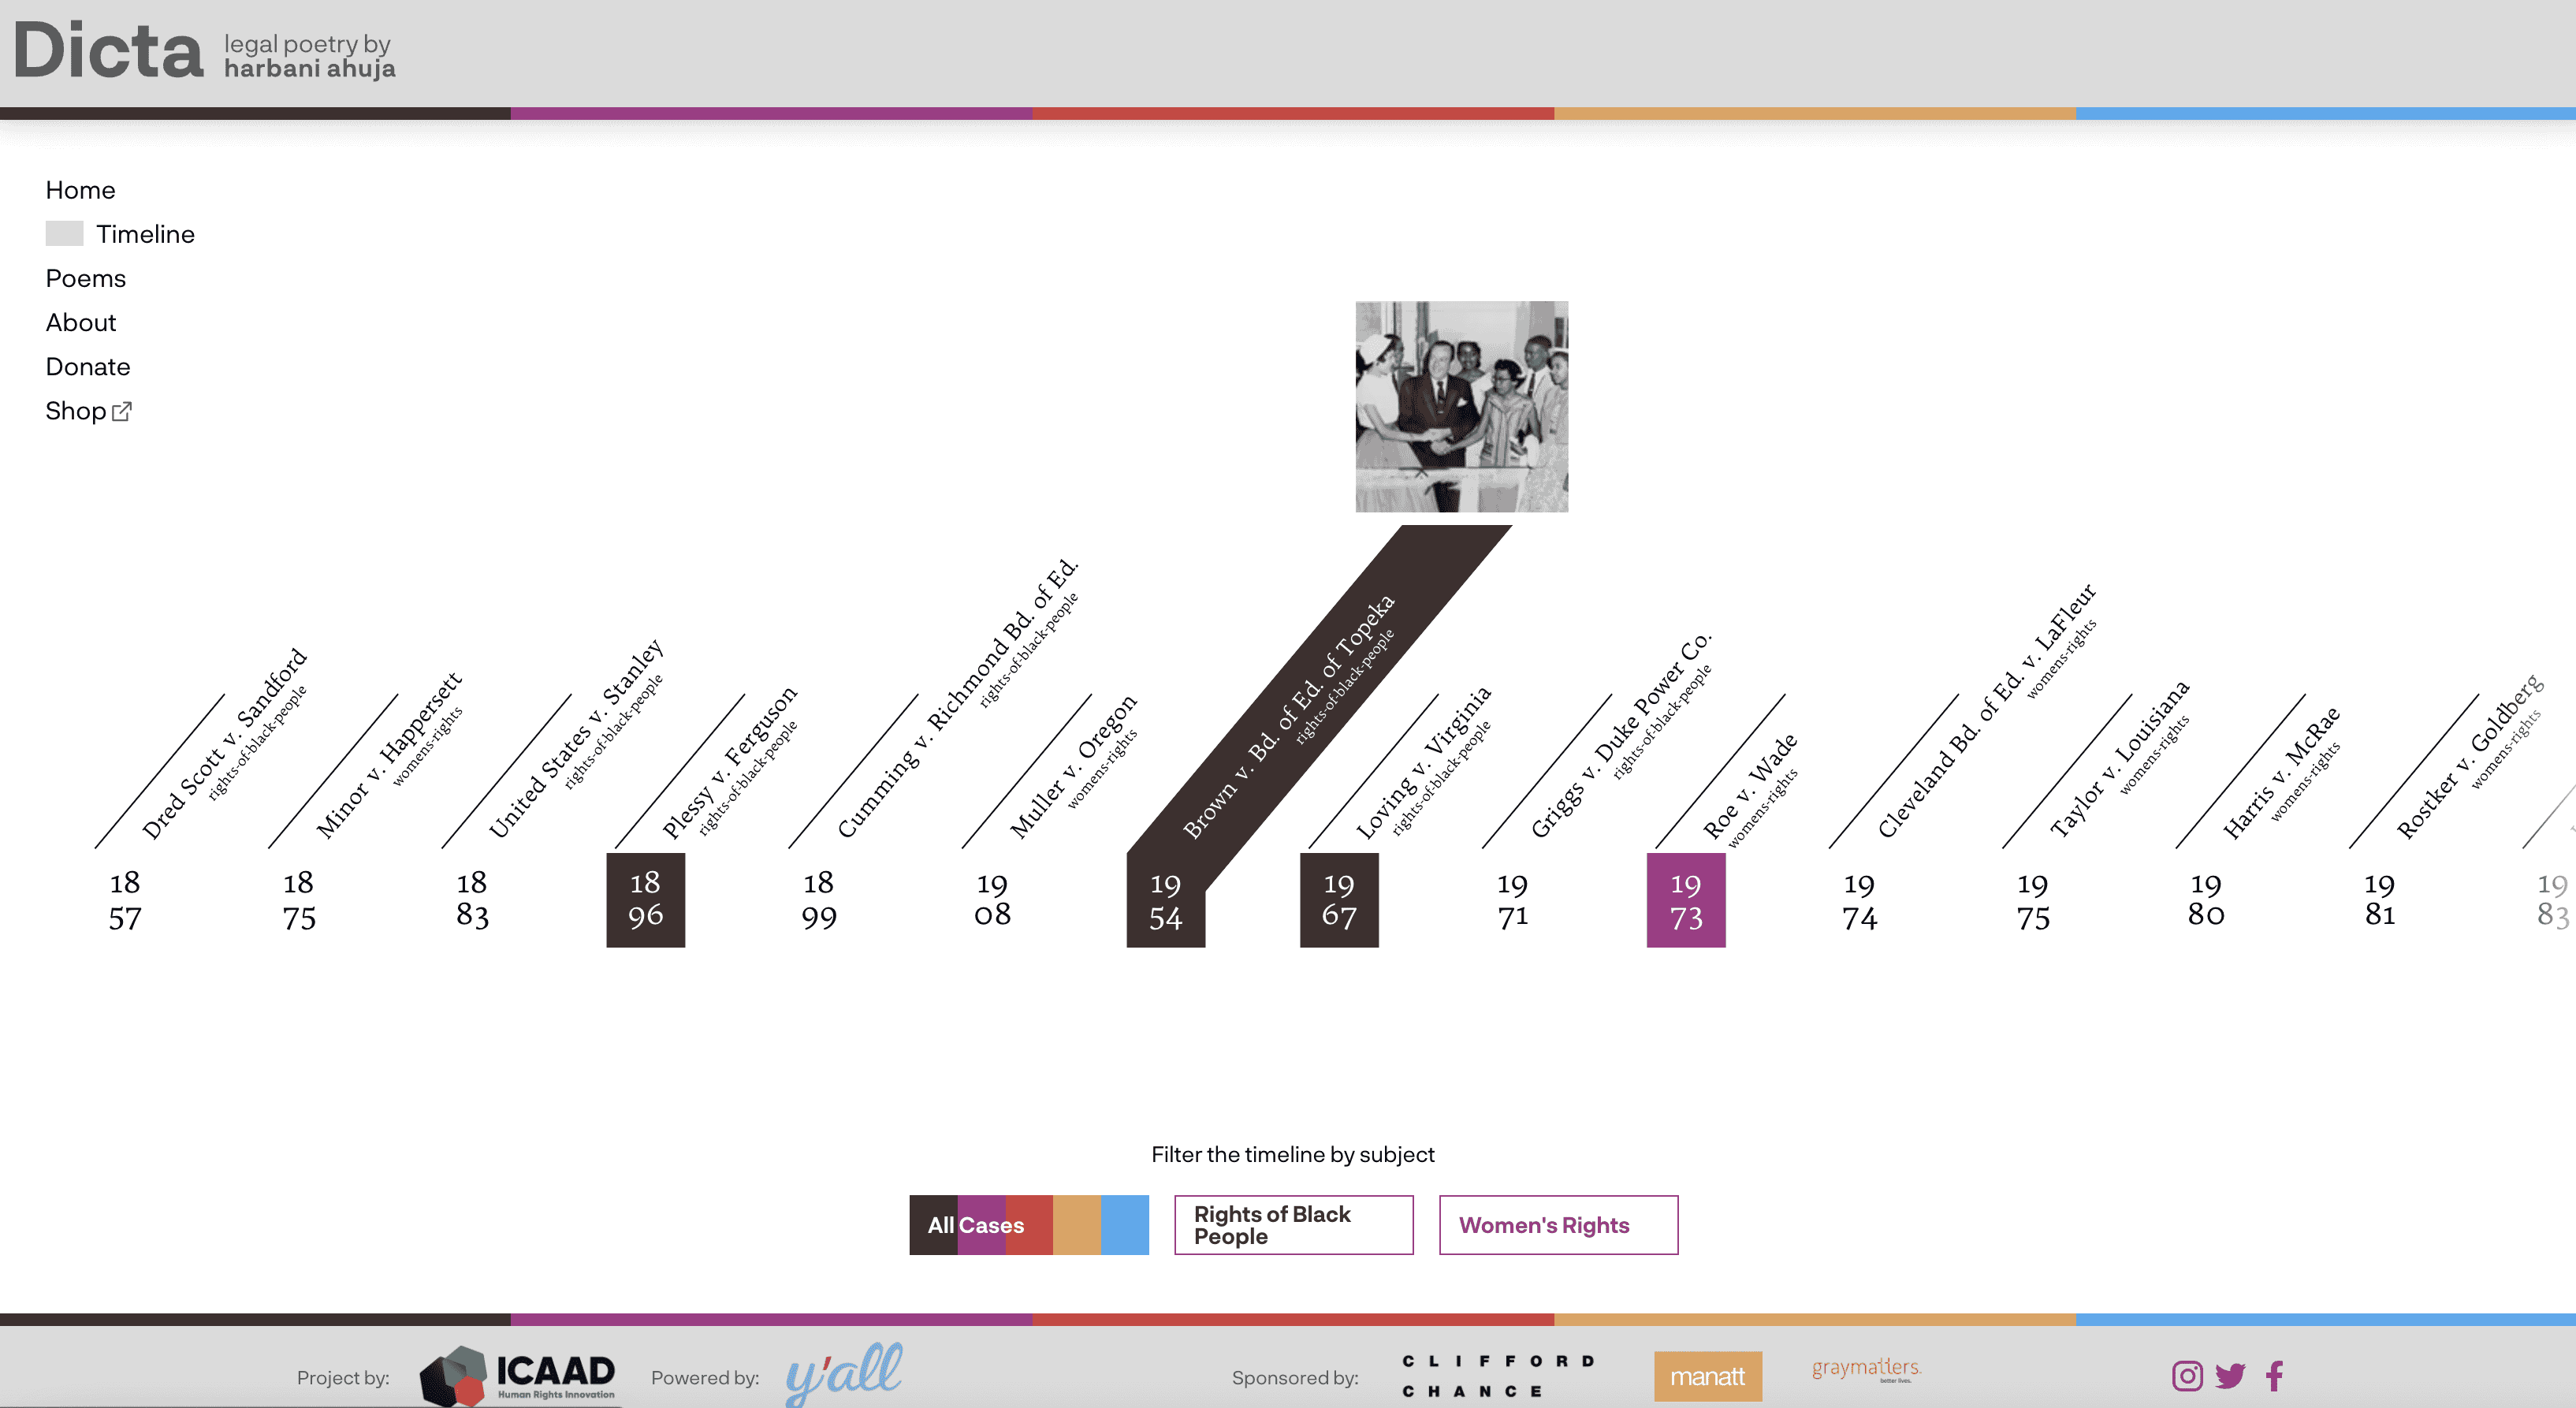 Interactive timeline from virtual exhibit